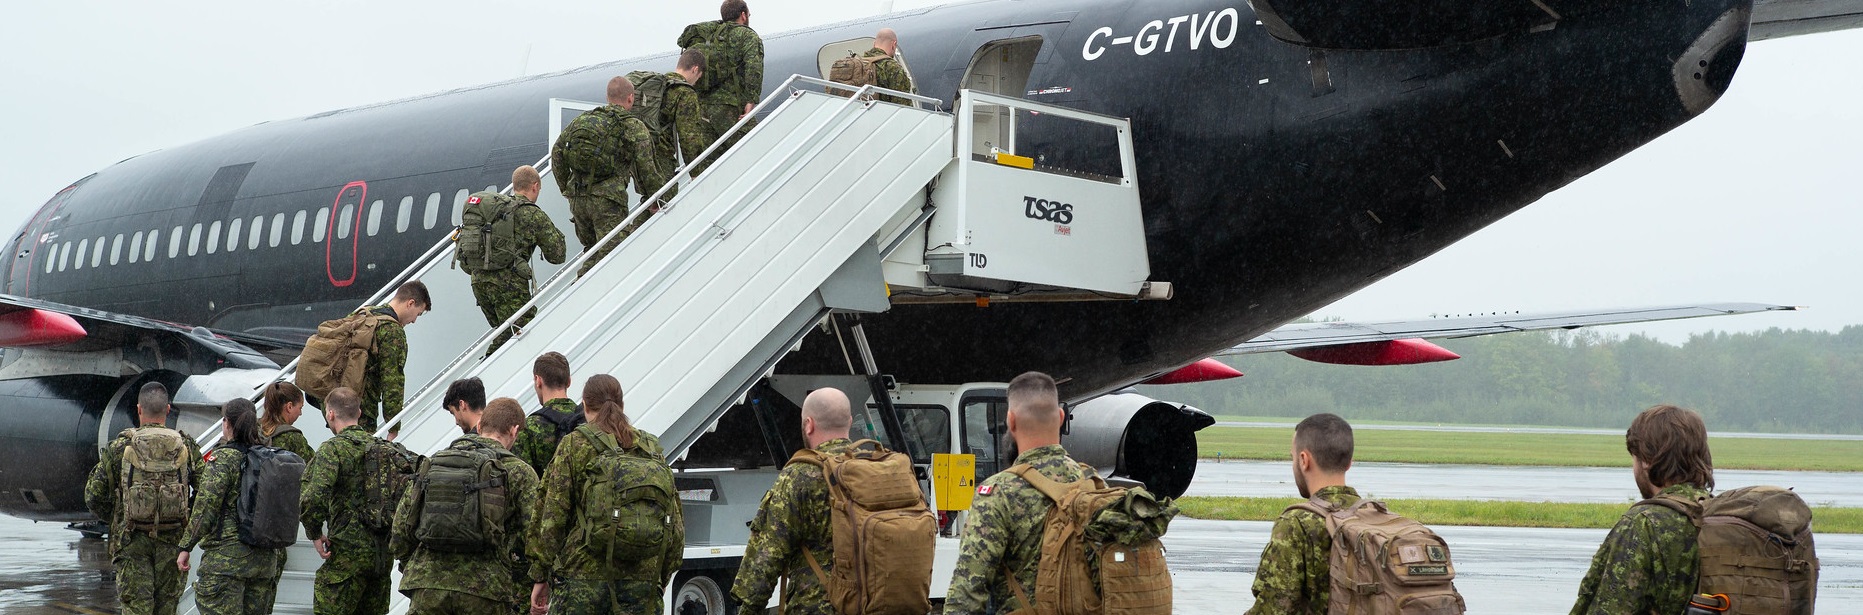 Canadian Armed Forces ends its mandatory reporting policy on misconduct